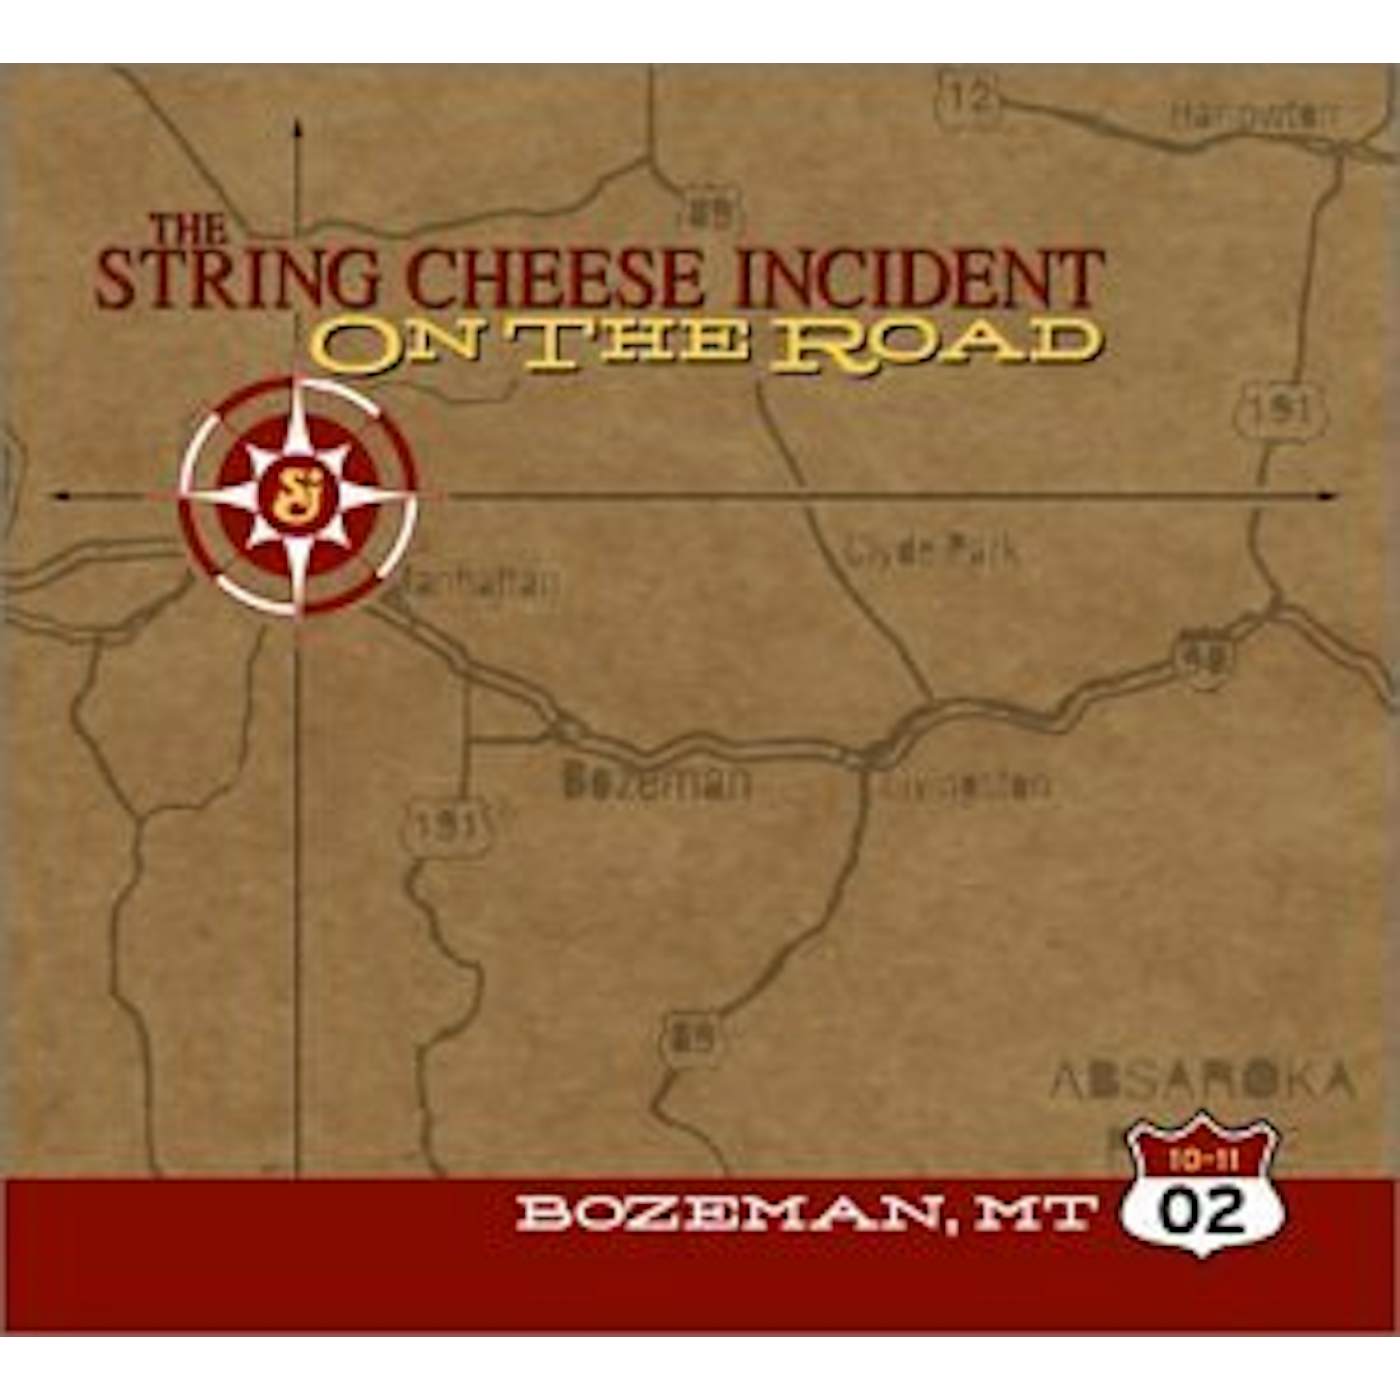 The String Cheese Incident OCTOBER 11 2002 BOZ CD